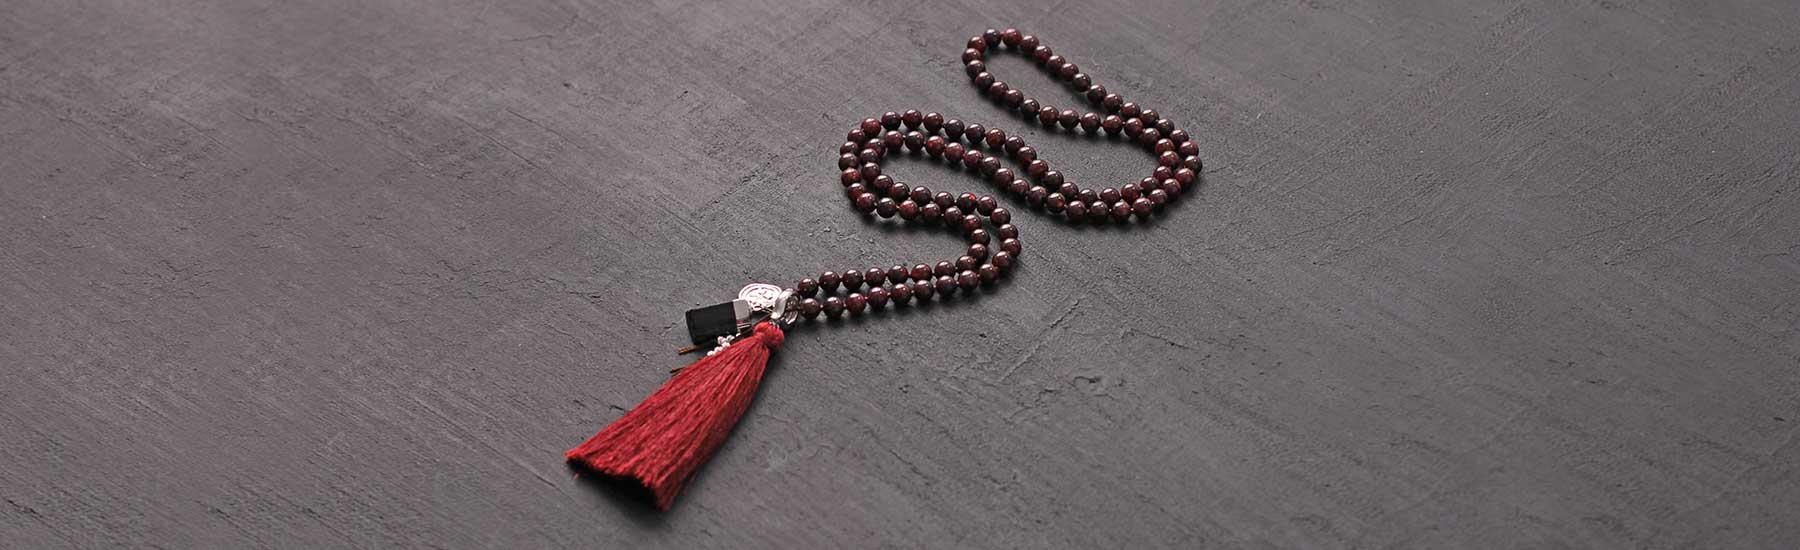 Jet Authentic Unique Collection of 108 Beads MALA with Mantra Gemstone Yoga  Meditation Hand Knotted Mala Prayer Bead Necklace